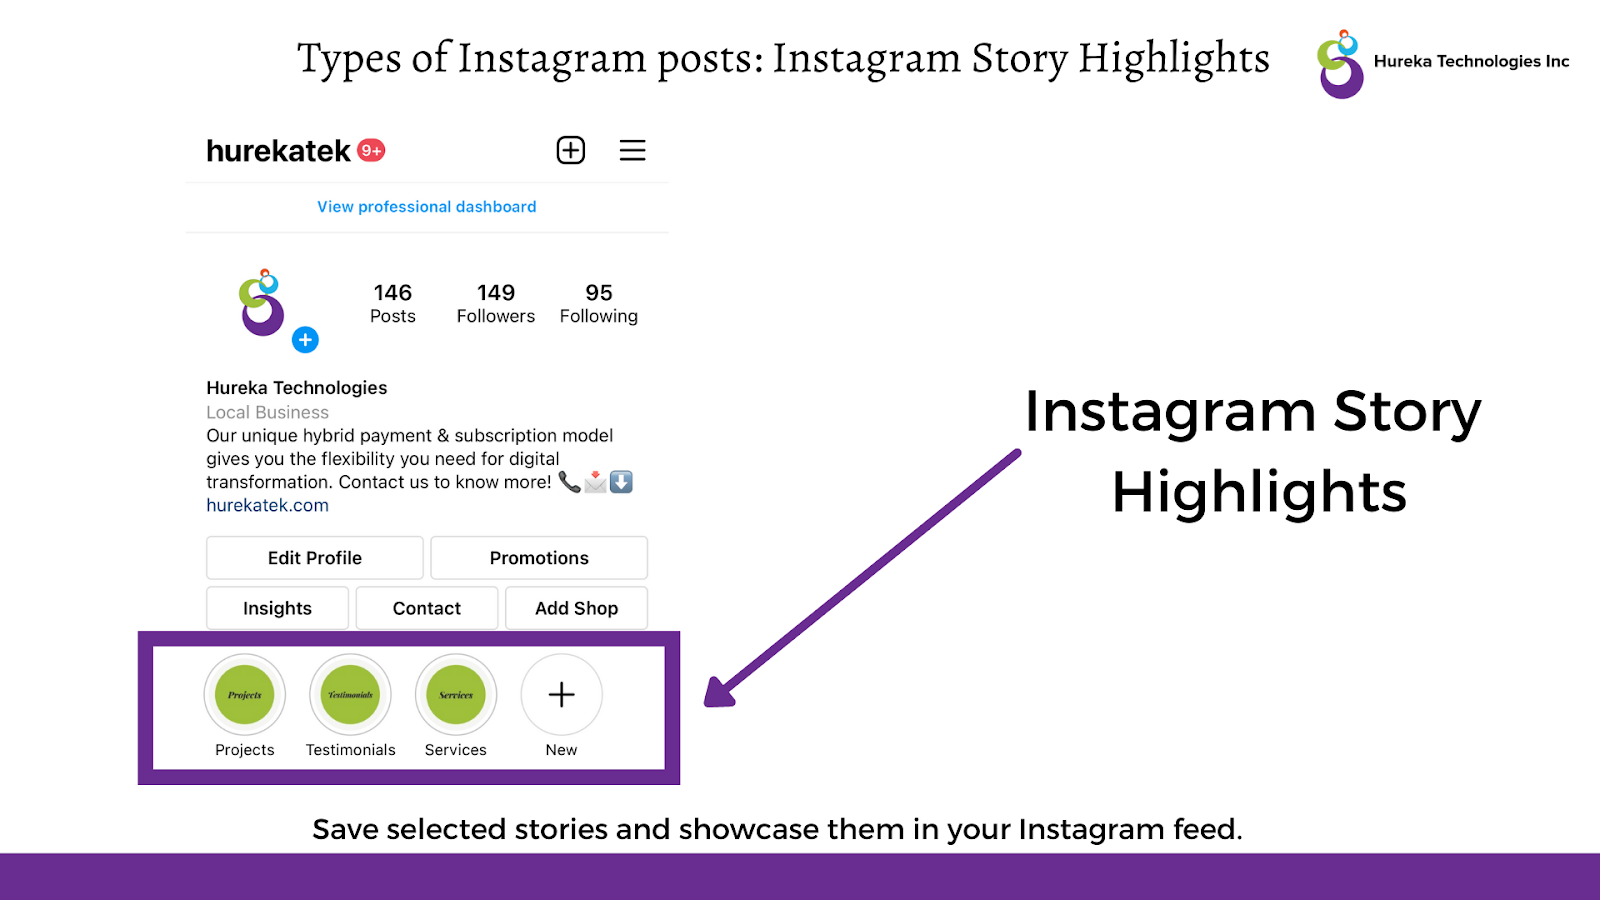 Illustration showing where Instagram Story Highlights appear on an Instagram profile